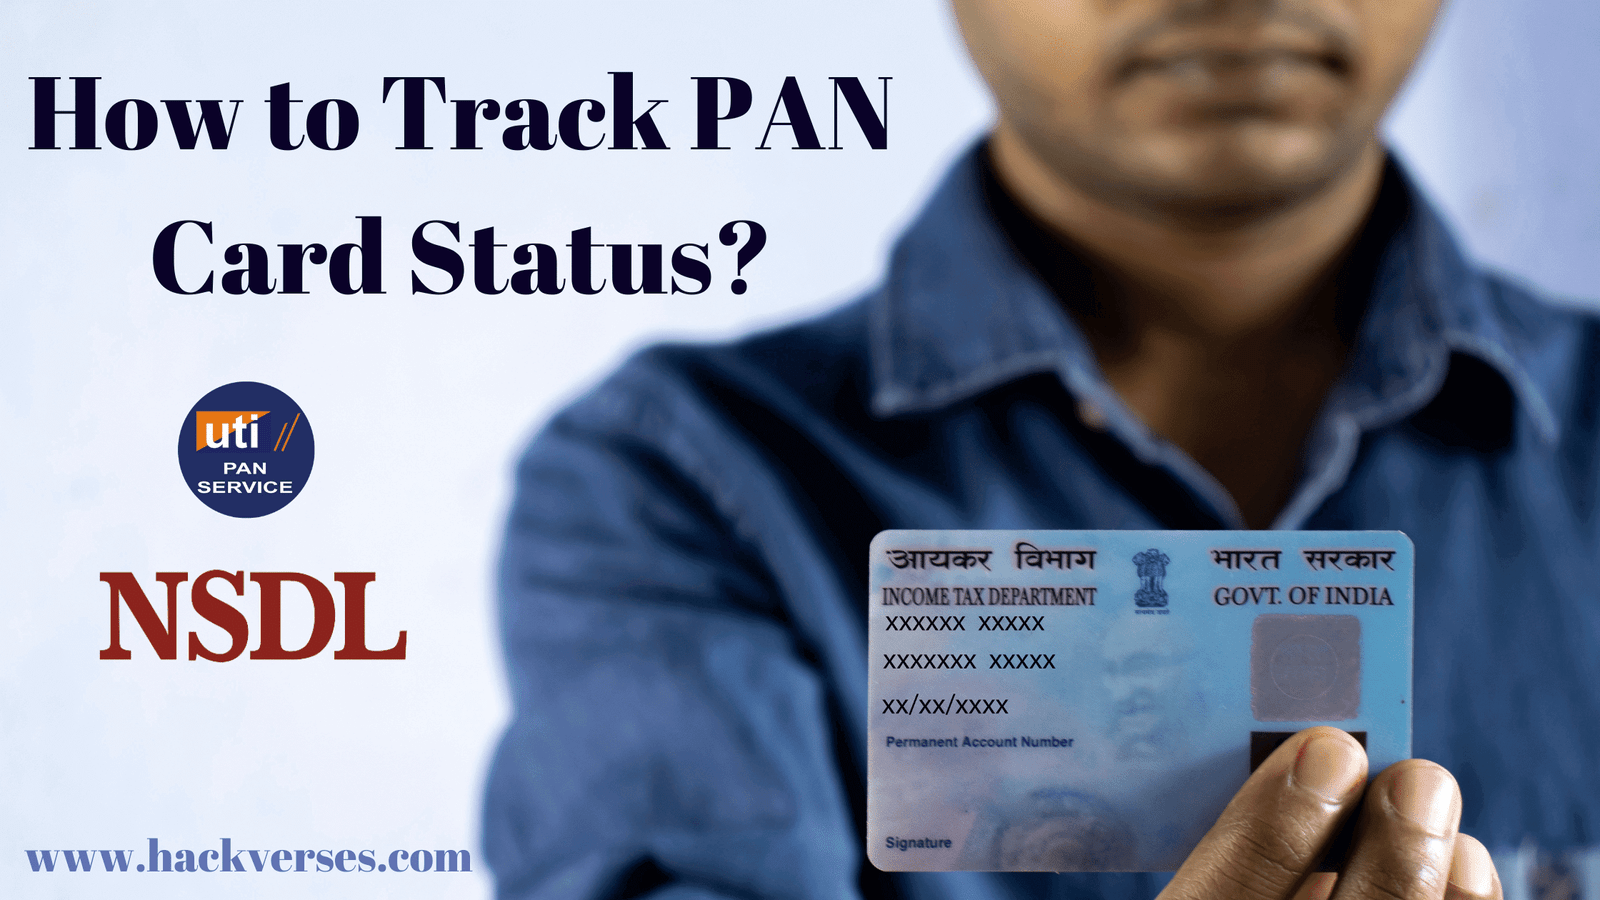 How to Track PAN Card Status?